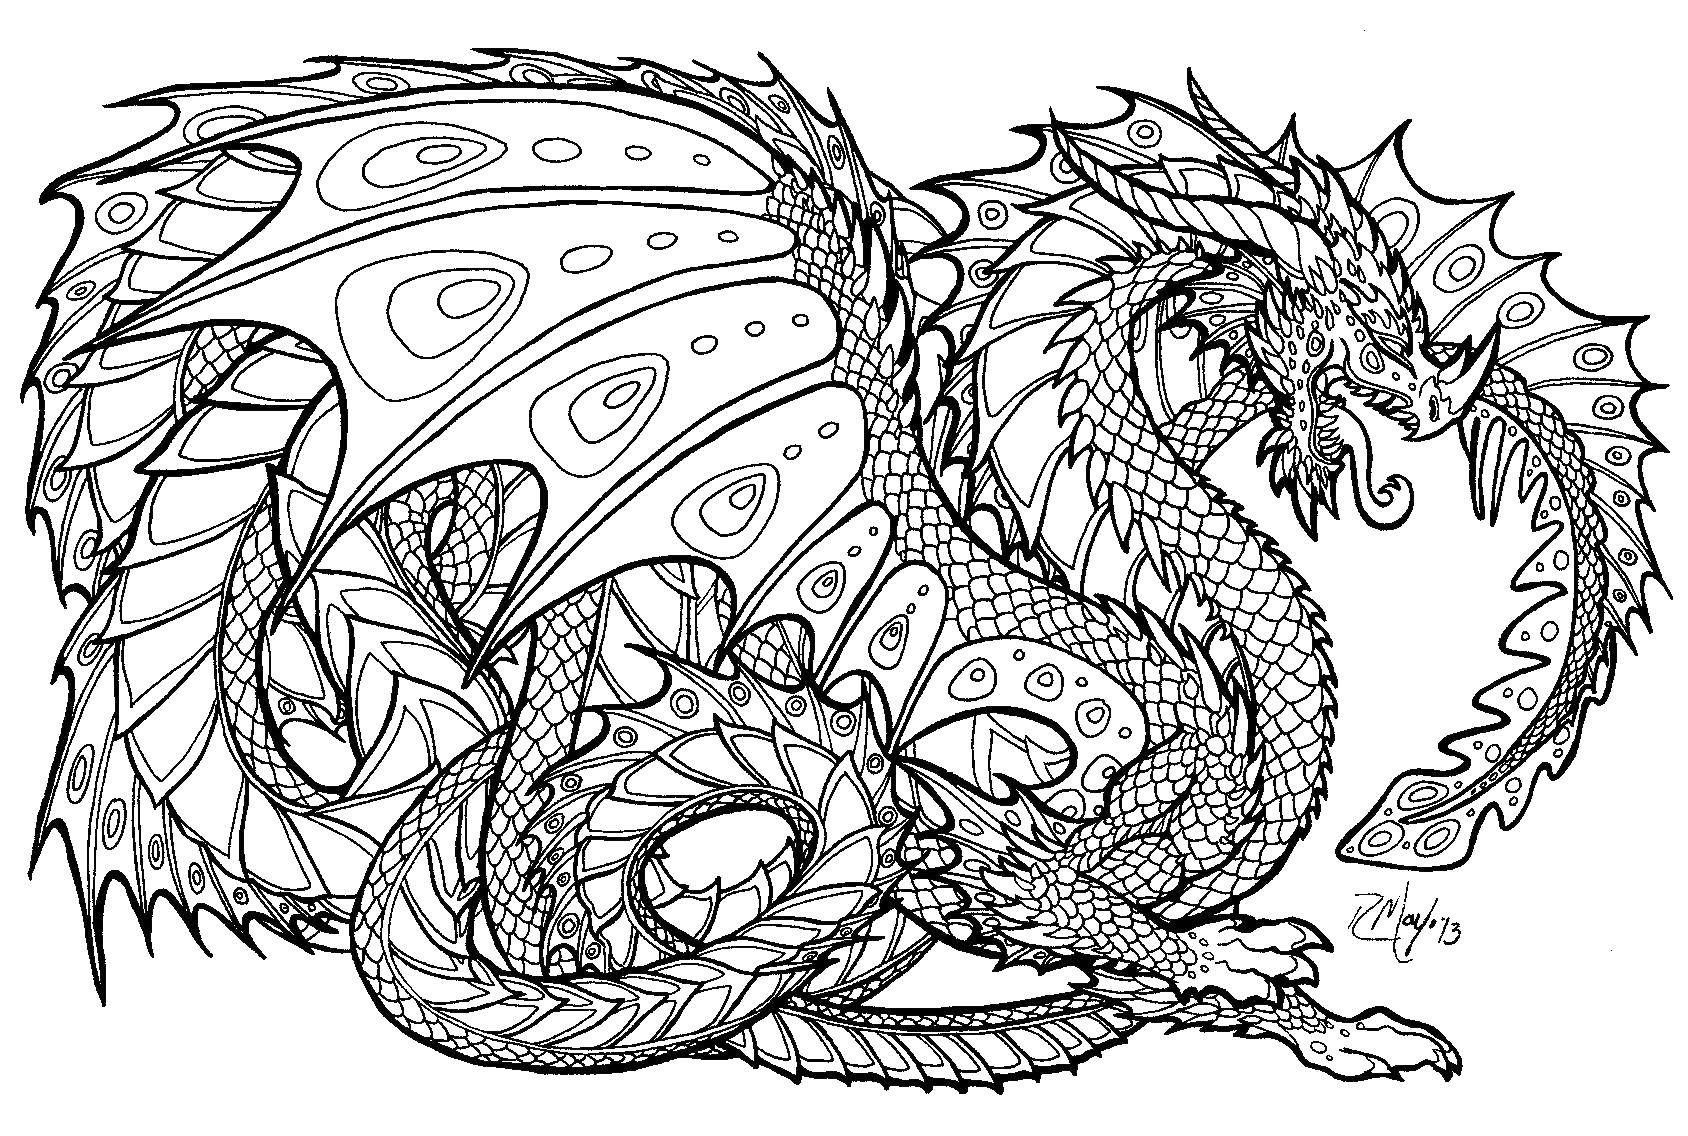 Coloring Chic dragon. Category Dragons. Tags:  Dragons.